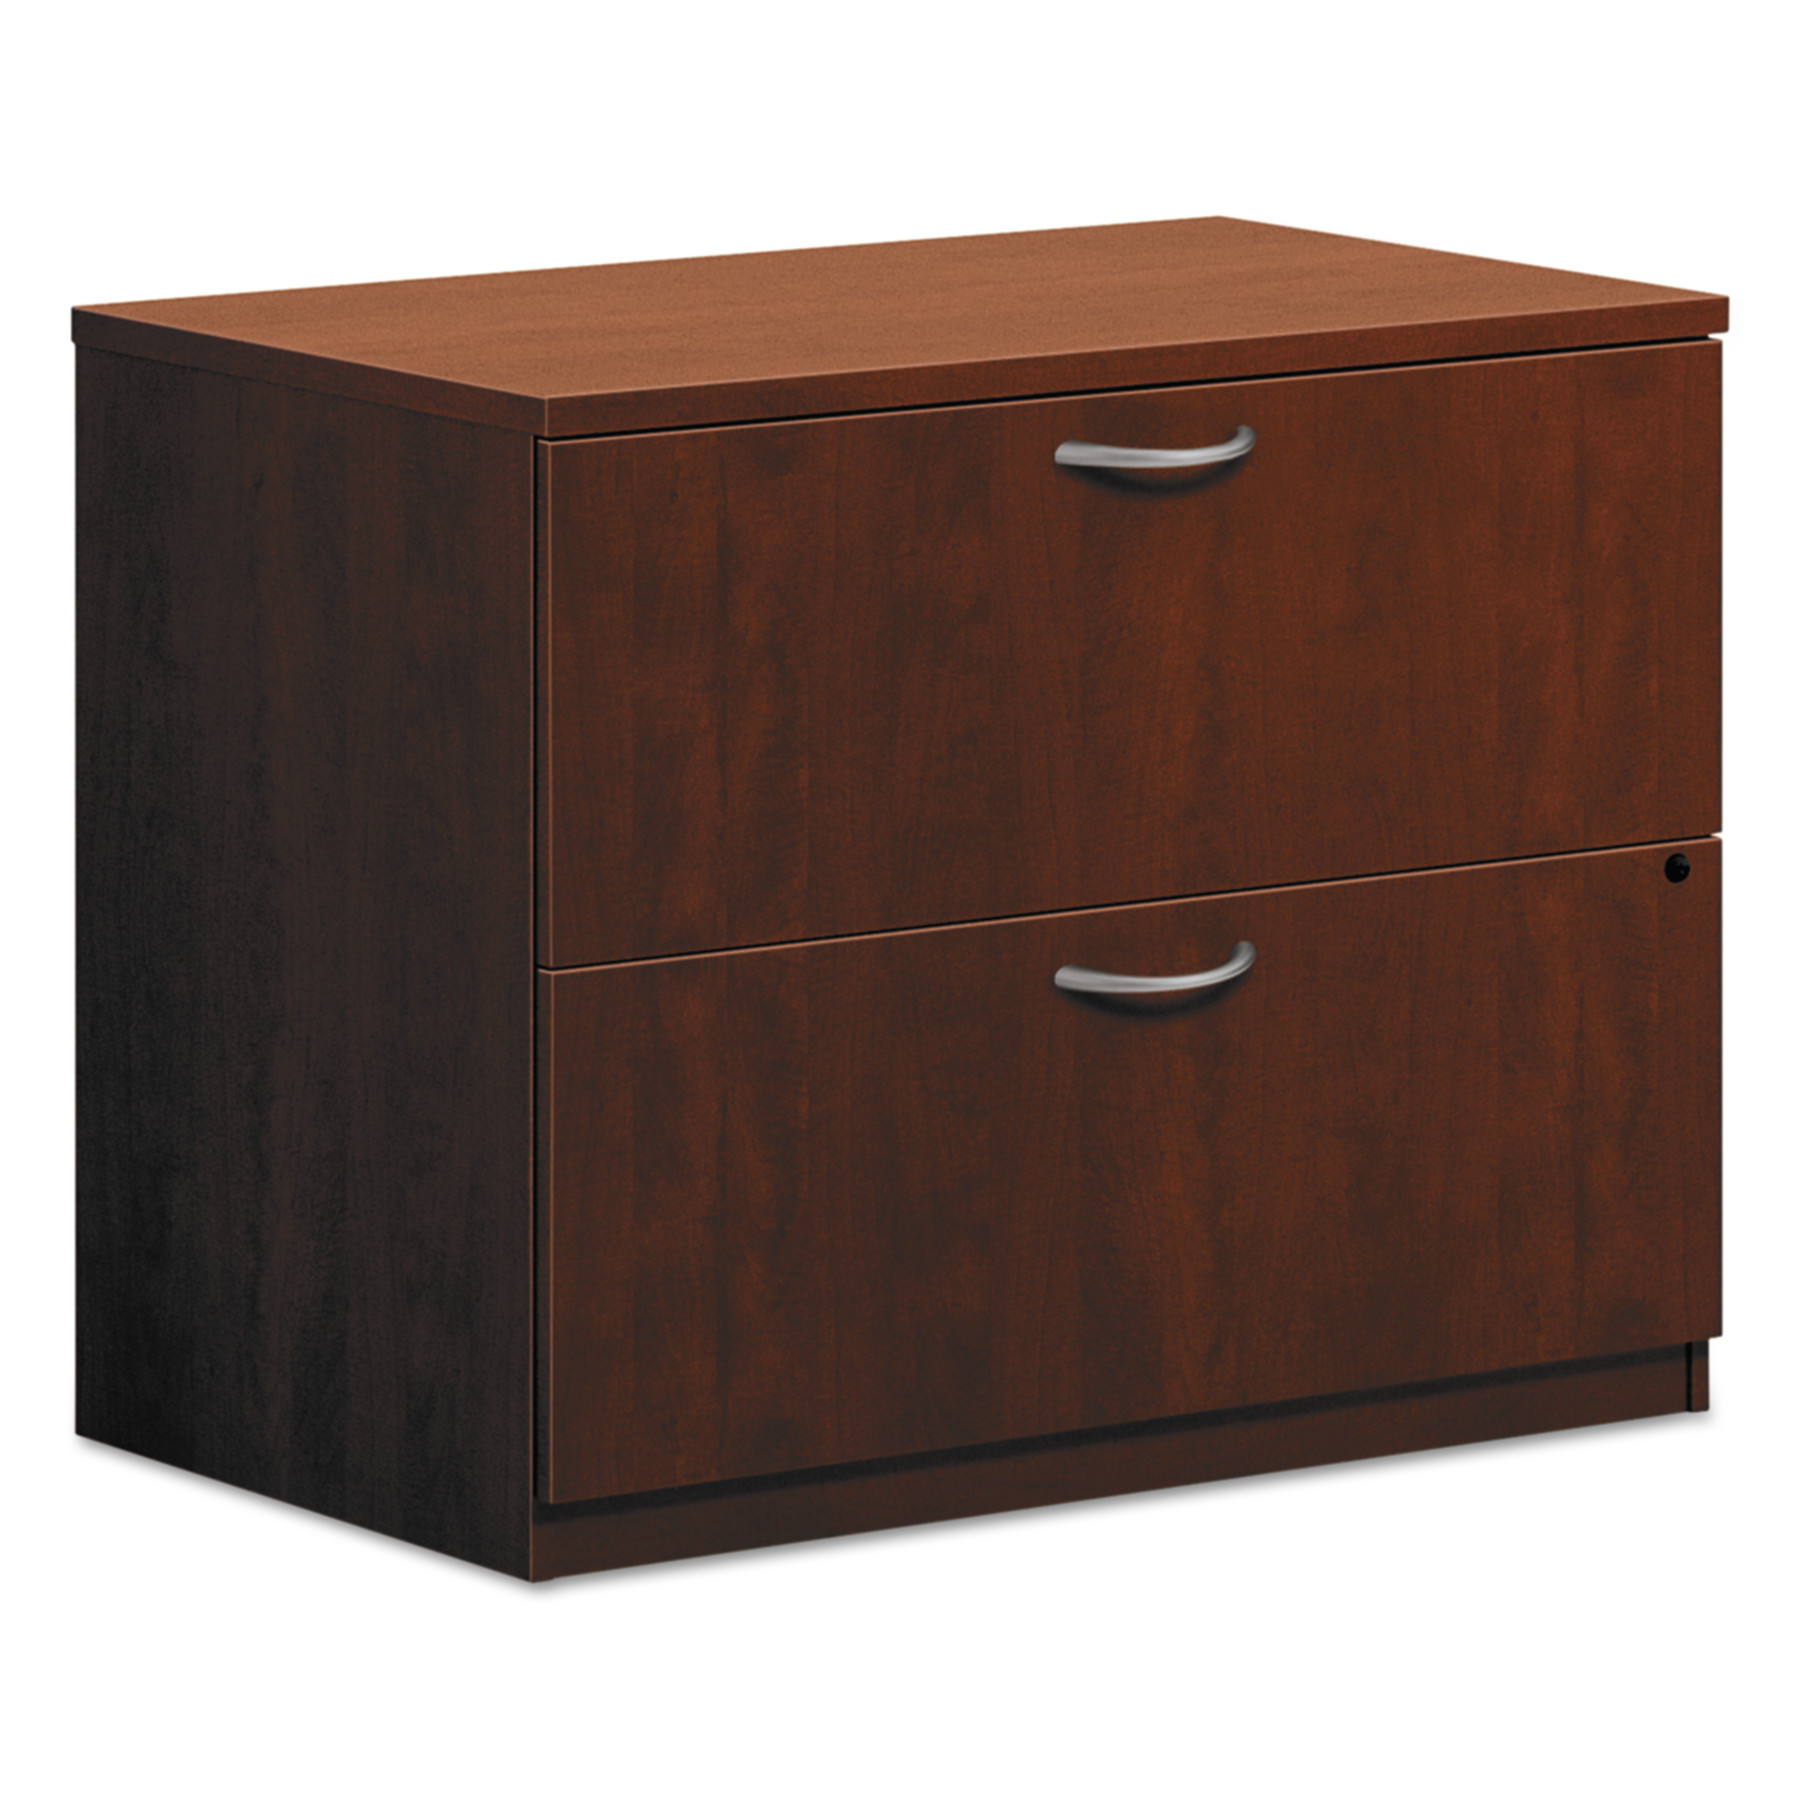 Basyx 2 Drawers Lateral Lockable Filing Cabinet, Cherry - image 1 of 2